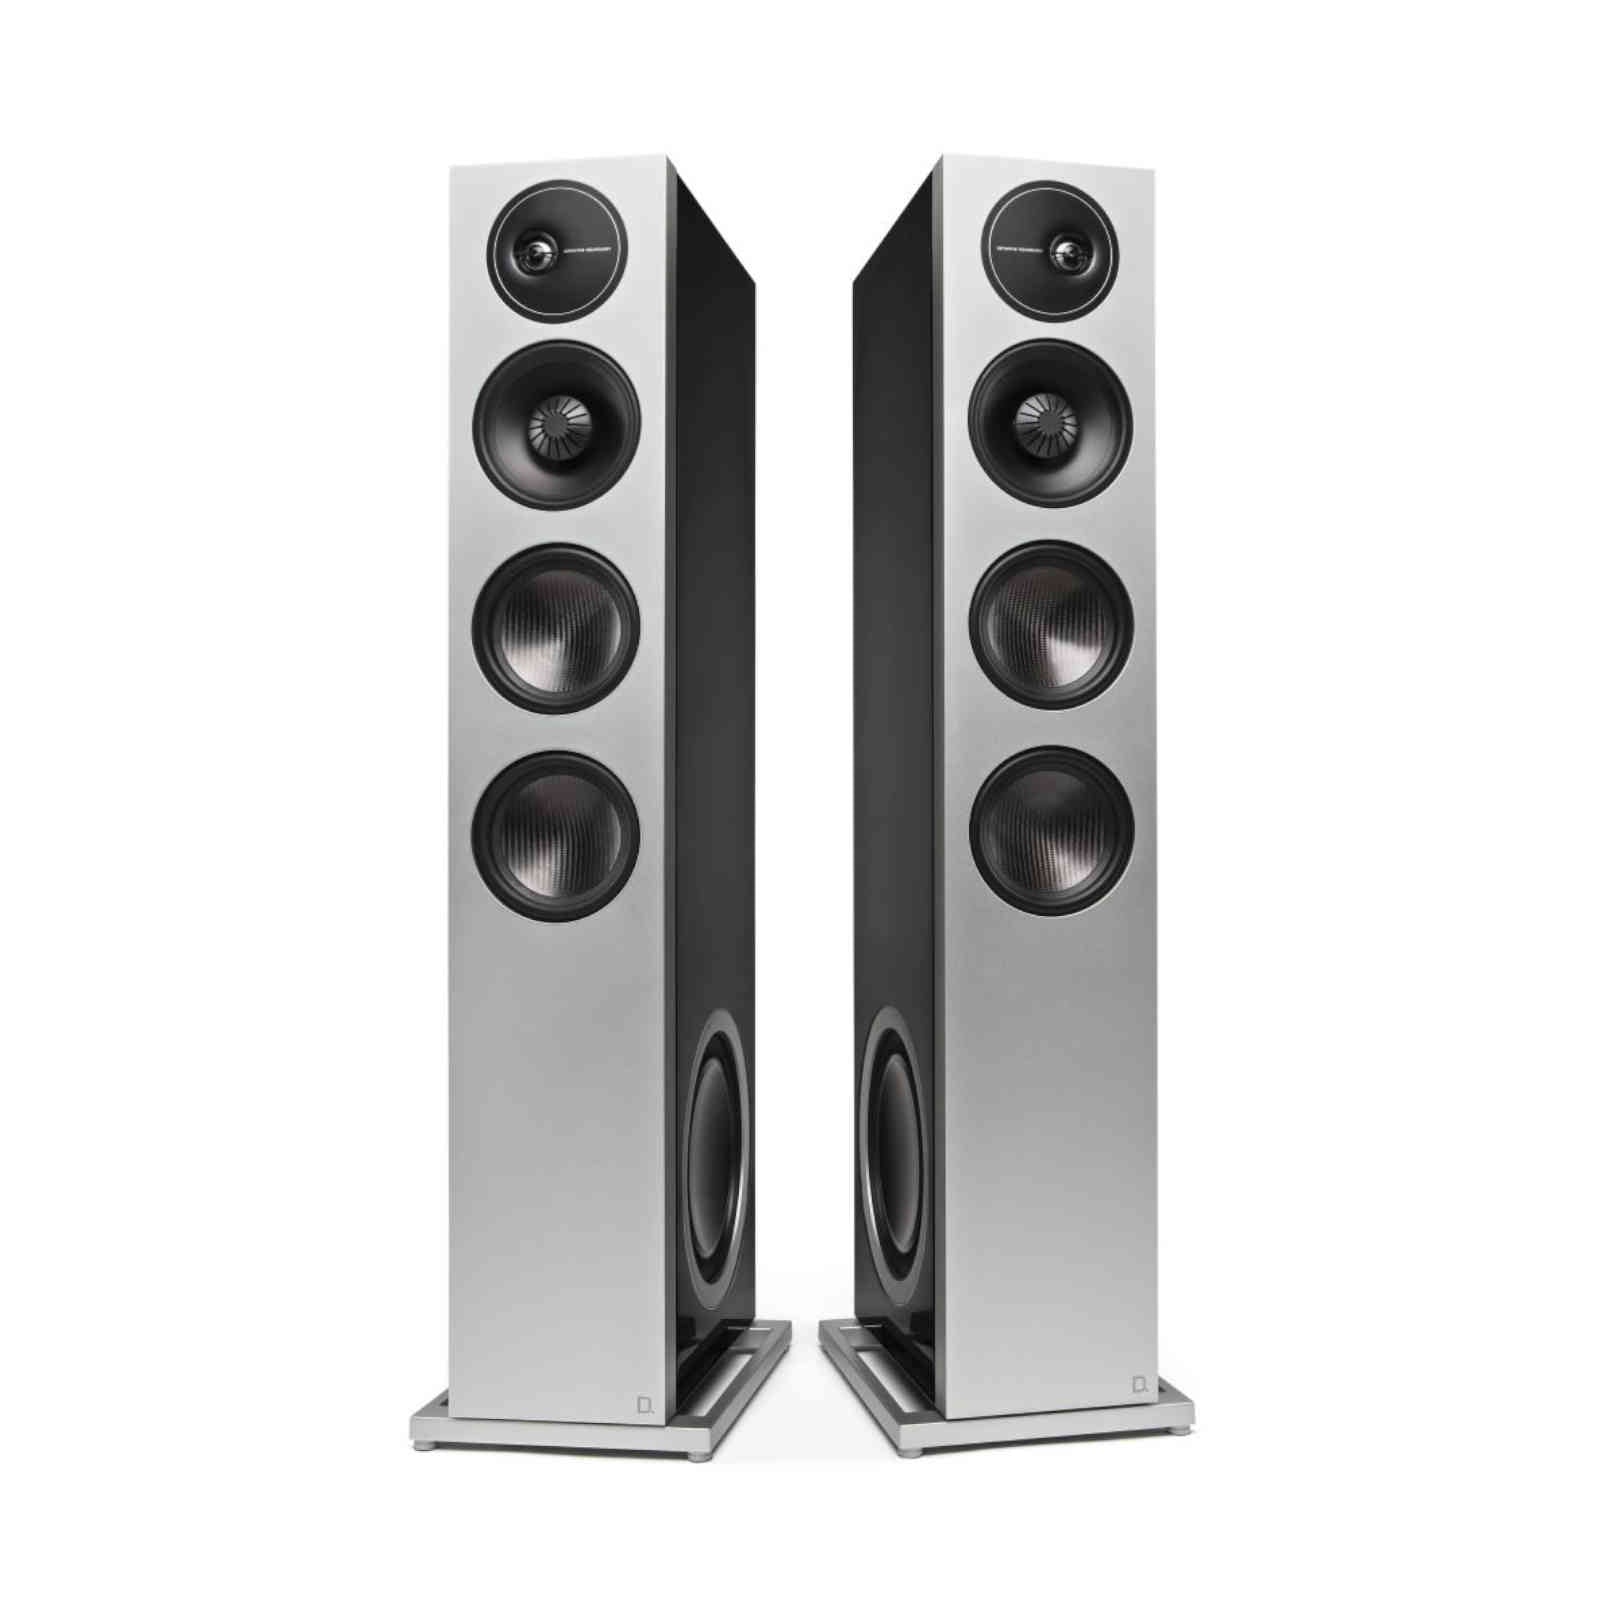 Definitive Technology D17 High-Performance Tower Speaker with Dual 10" Passive Bass Radiators (Pair) - Ooberpad India